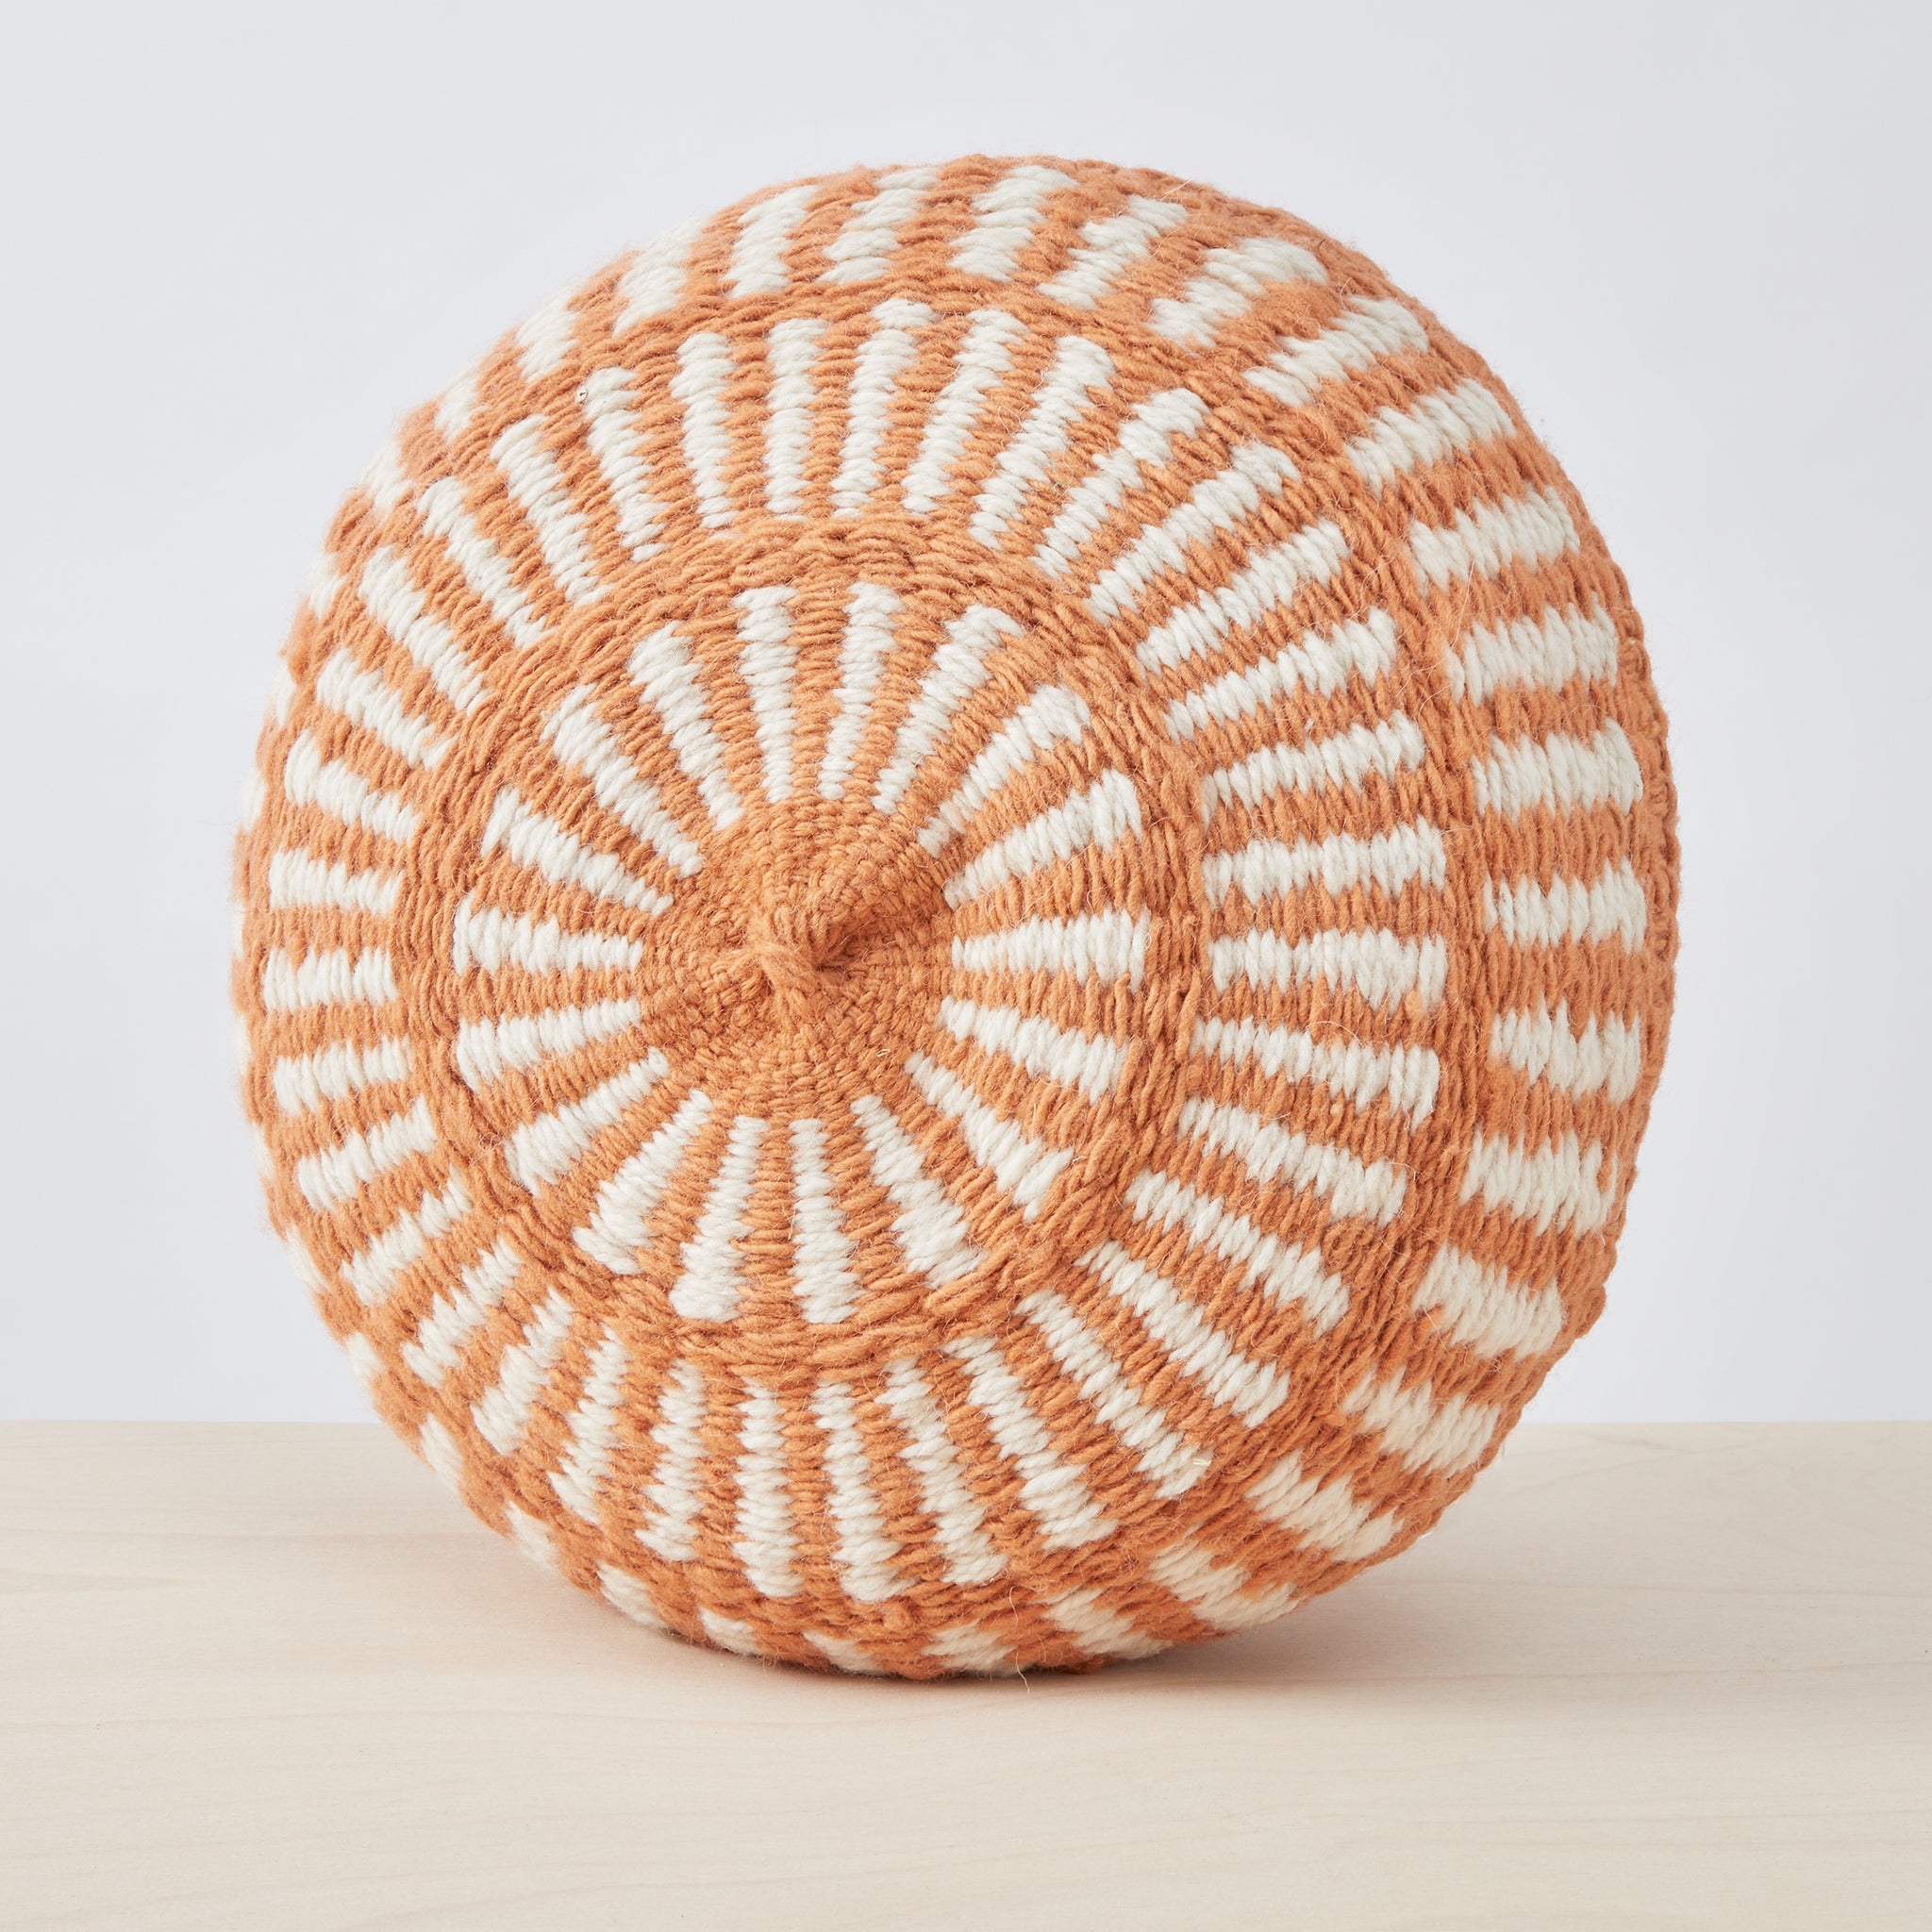 Salta Large cushion, natural white & burnt orange. A great eye-catcher on your sofa or in your favourite armchair. Individual, lovingly handmade cushion made from 100% Argentinian sheep's wool with a traditional pattern. 